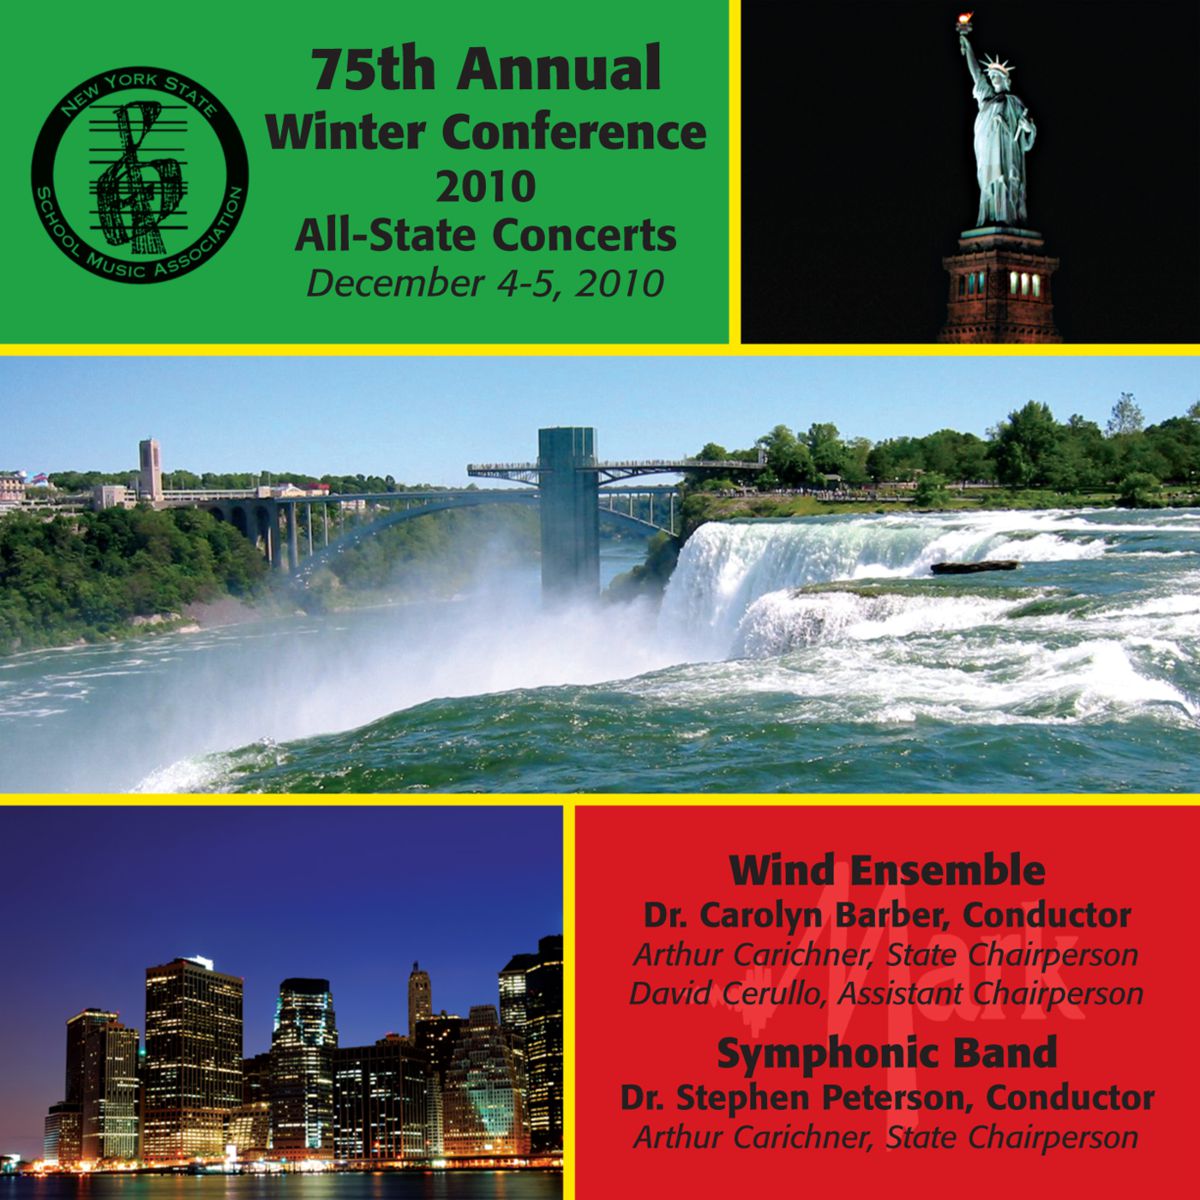 2010 New York State School Music Association: All-State Wind Ensemble and All-State Symphonic Band - hacer clic aqu